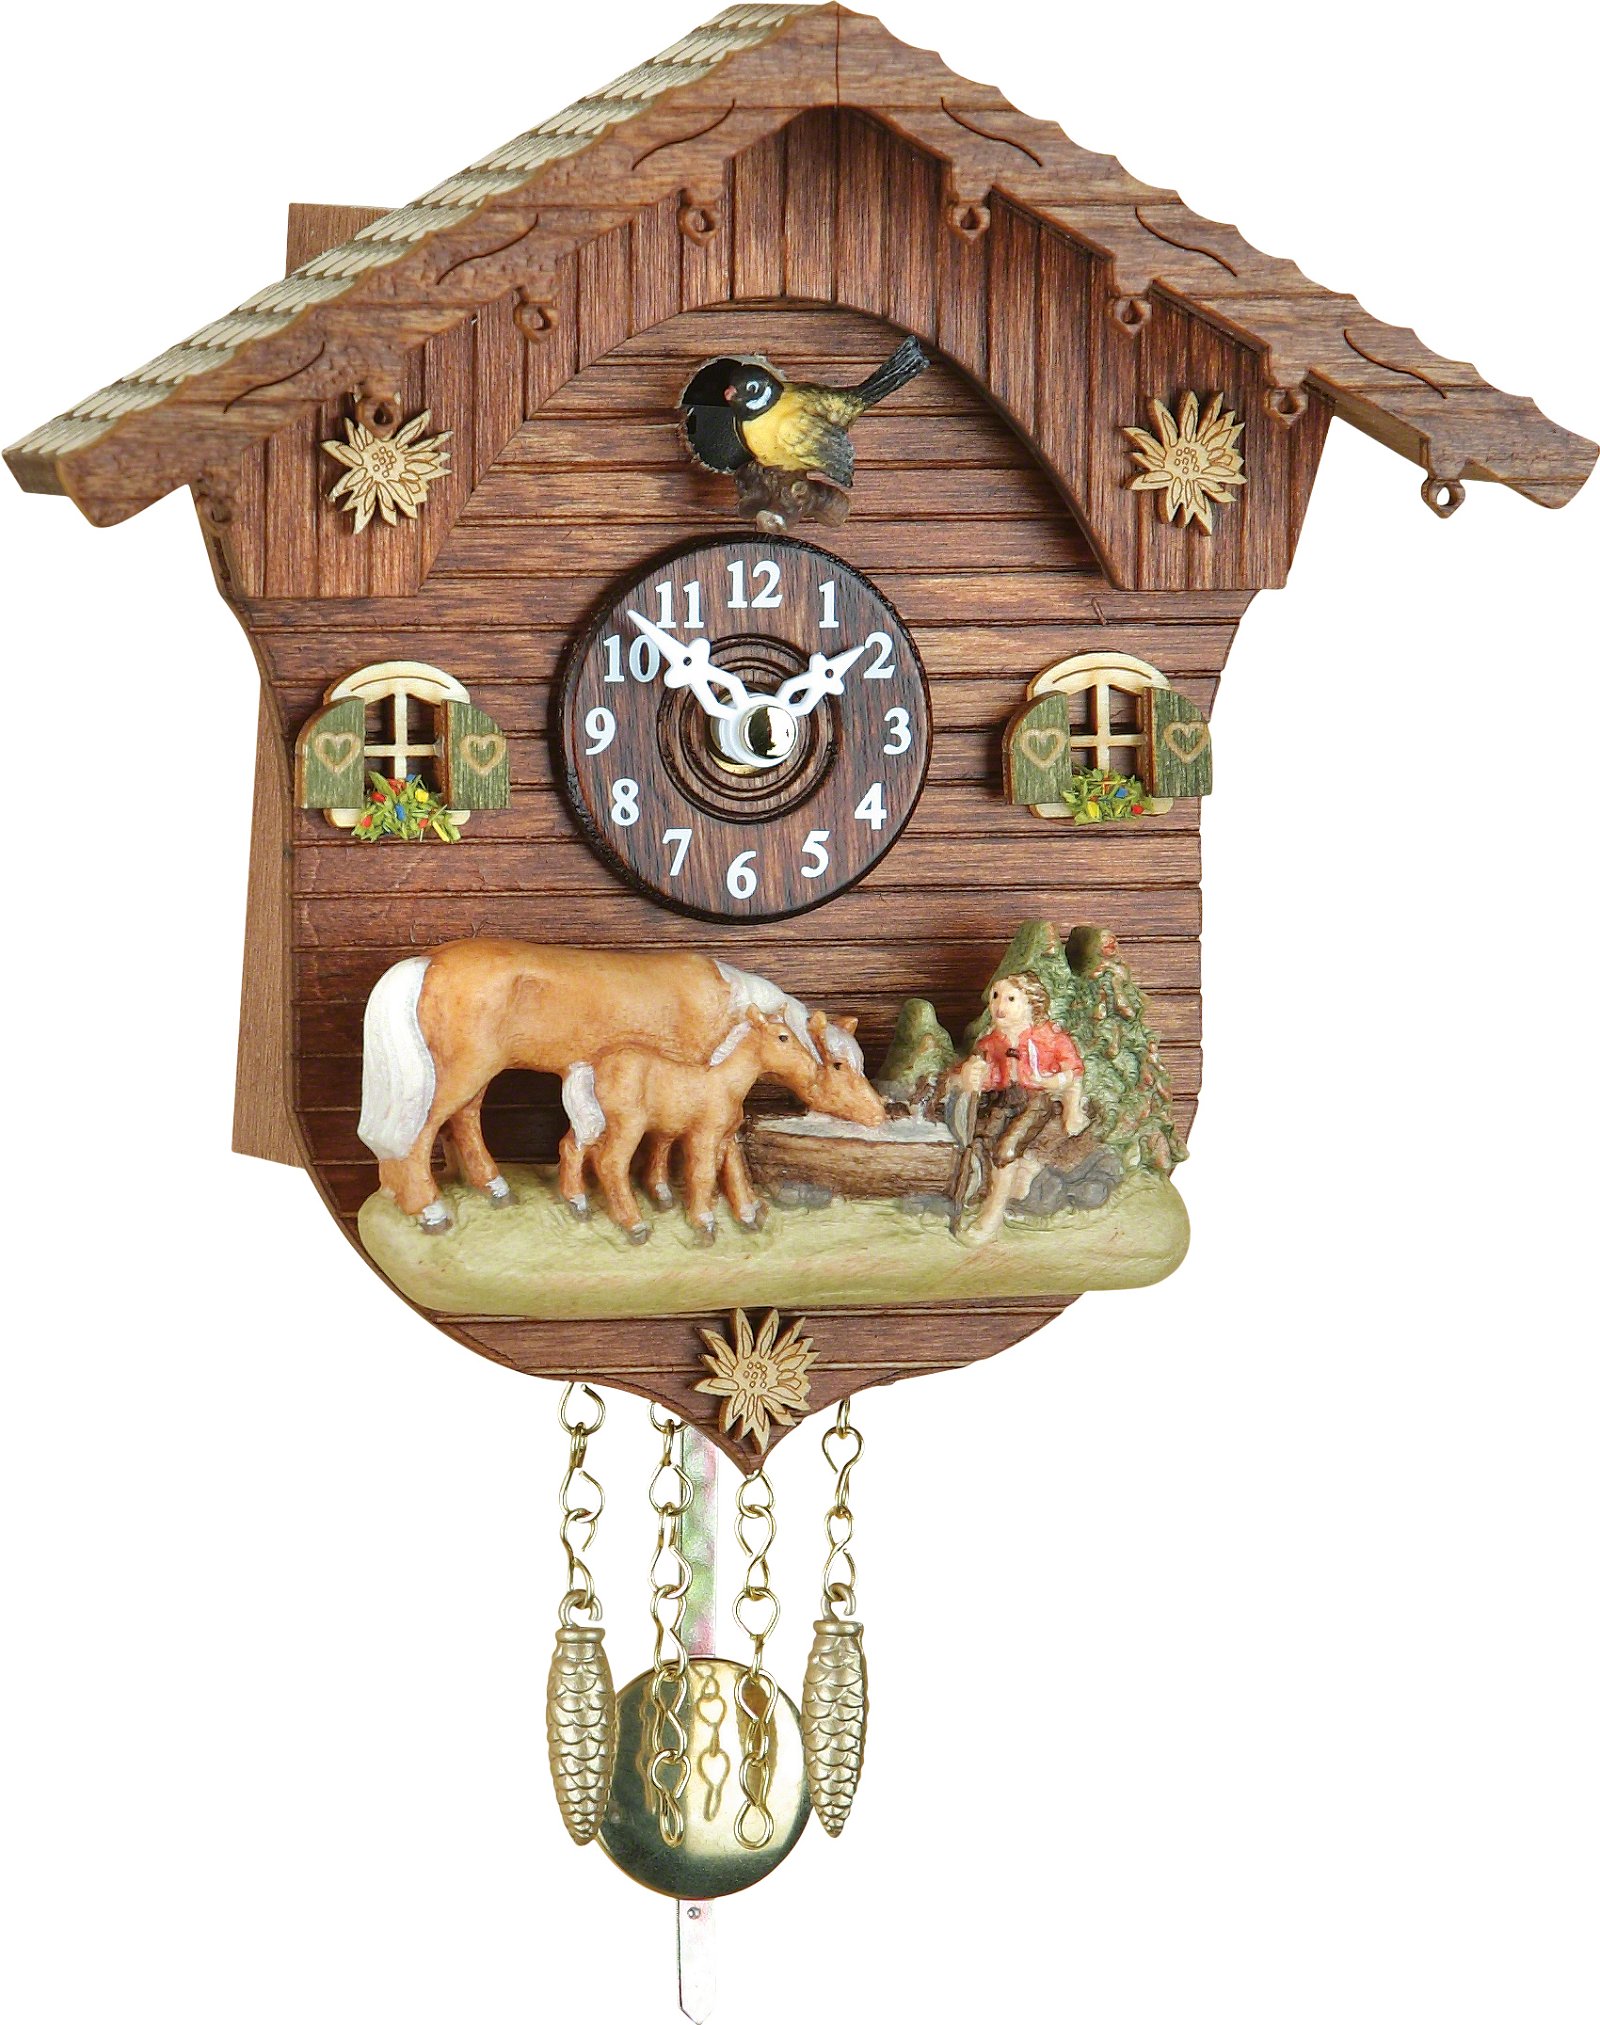 Kuckulino Black Forest Clock Swiss House with quartz movement and cuckoo chime incl turning dancers batterie TU 2019 SQ by Trenkle Uhren 